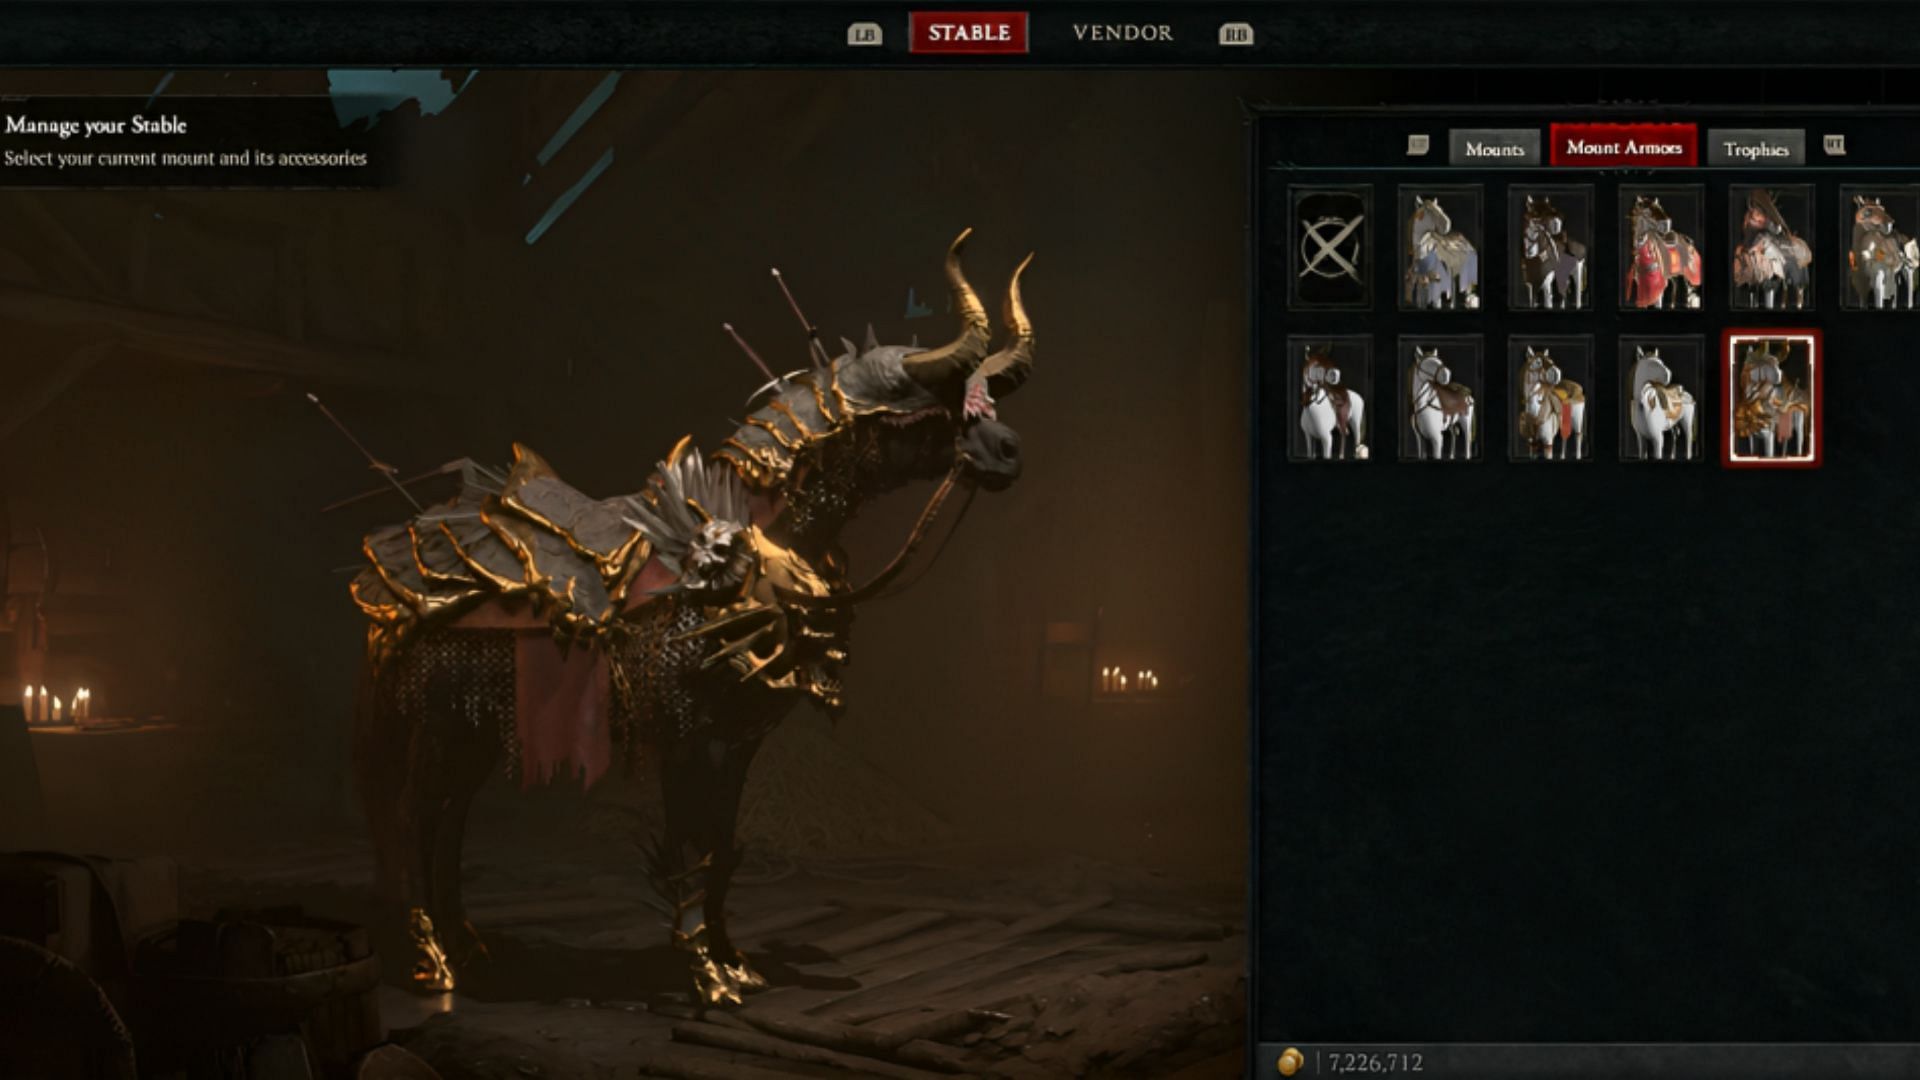 In Diablo 4, there are various types of Mounts, each with its distinctive appearance (Image via Blizzard Entertainment)